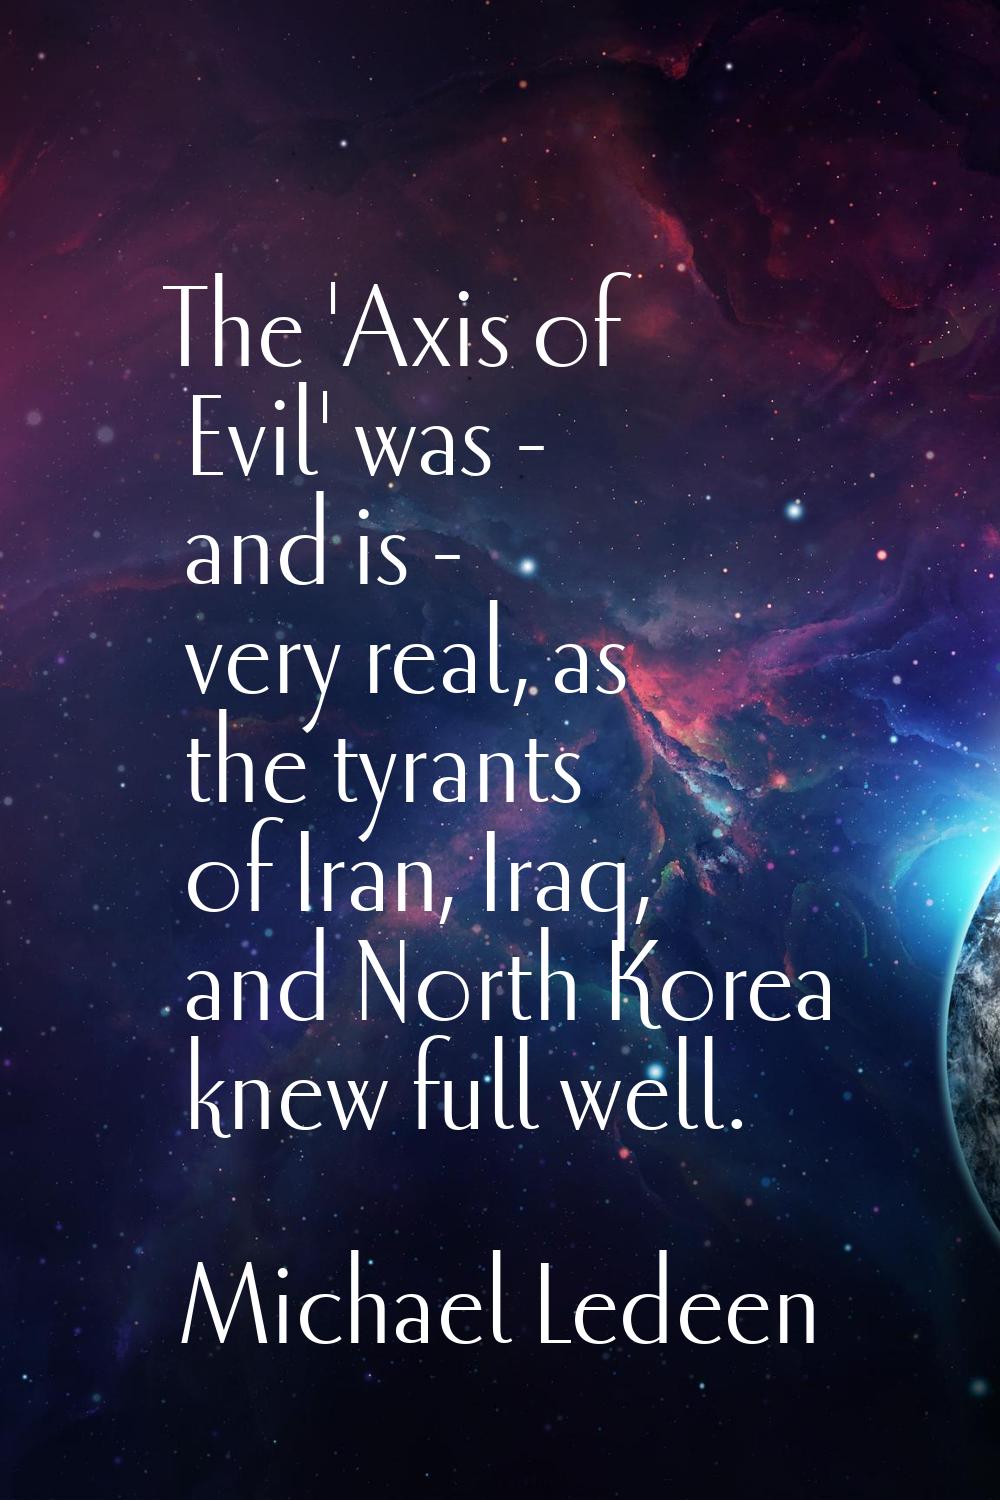 The 'Axis of Evil' was - and is - very real, as the tyrants of Iran, Iraq, and North Korea knew ful